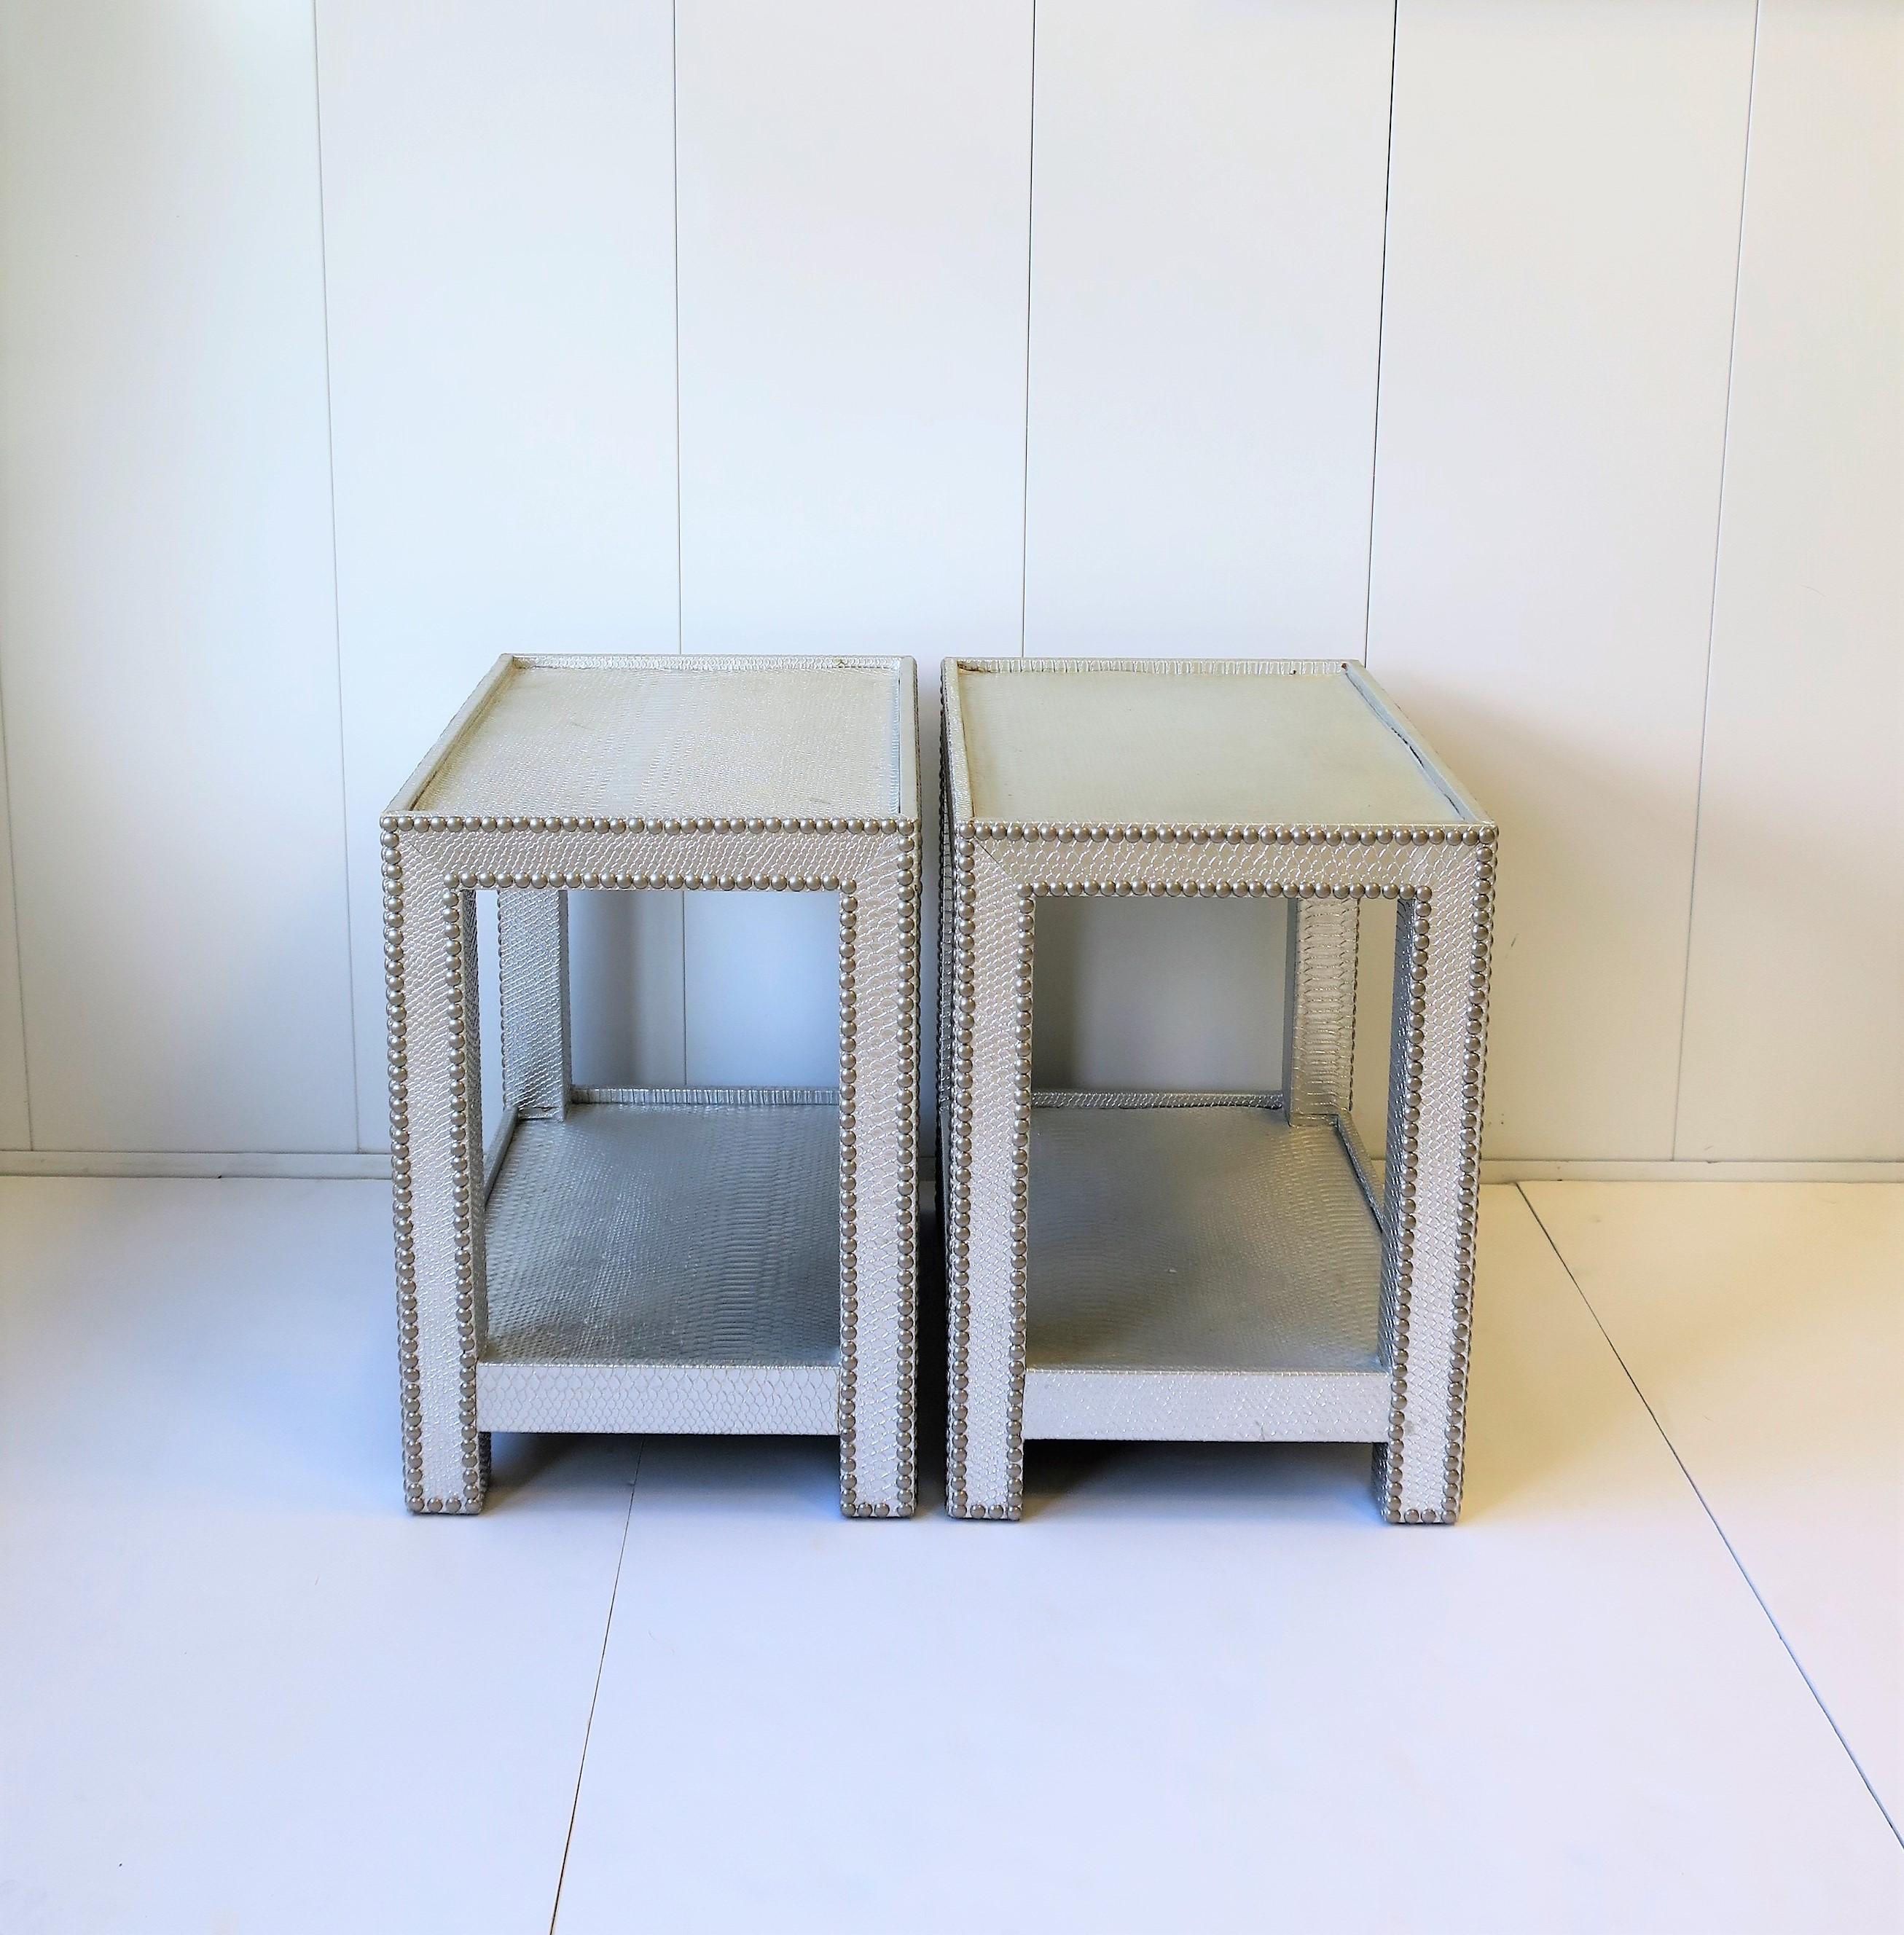 A beautiful modern style pair of silver embossed snakeskin-esque end or nightstand [night stand] tables with lower shelf. Table design style is also known as the 'telephone' table. Tables are wrapped in a snakeskin-esque material and finished with a